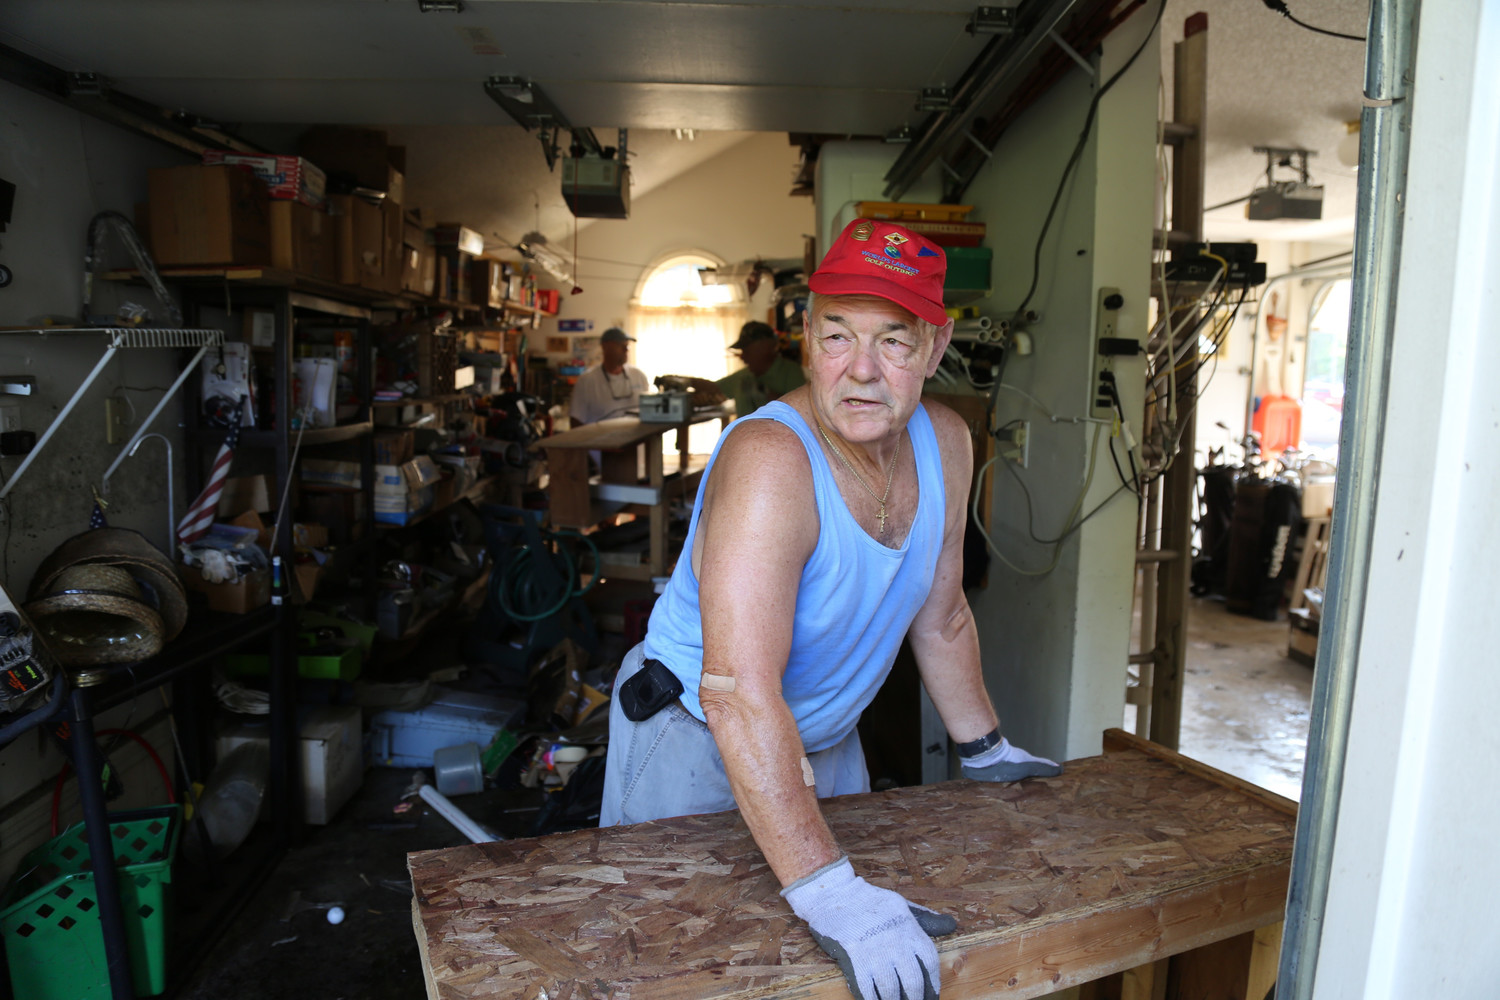 Denny Colbert, a member of the Knights of Columbus Council in New Bern, North Carolina, volunteers Sept. 22 in a home damaged in flooding caused by Hurricane Florence.